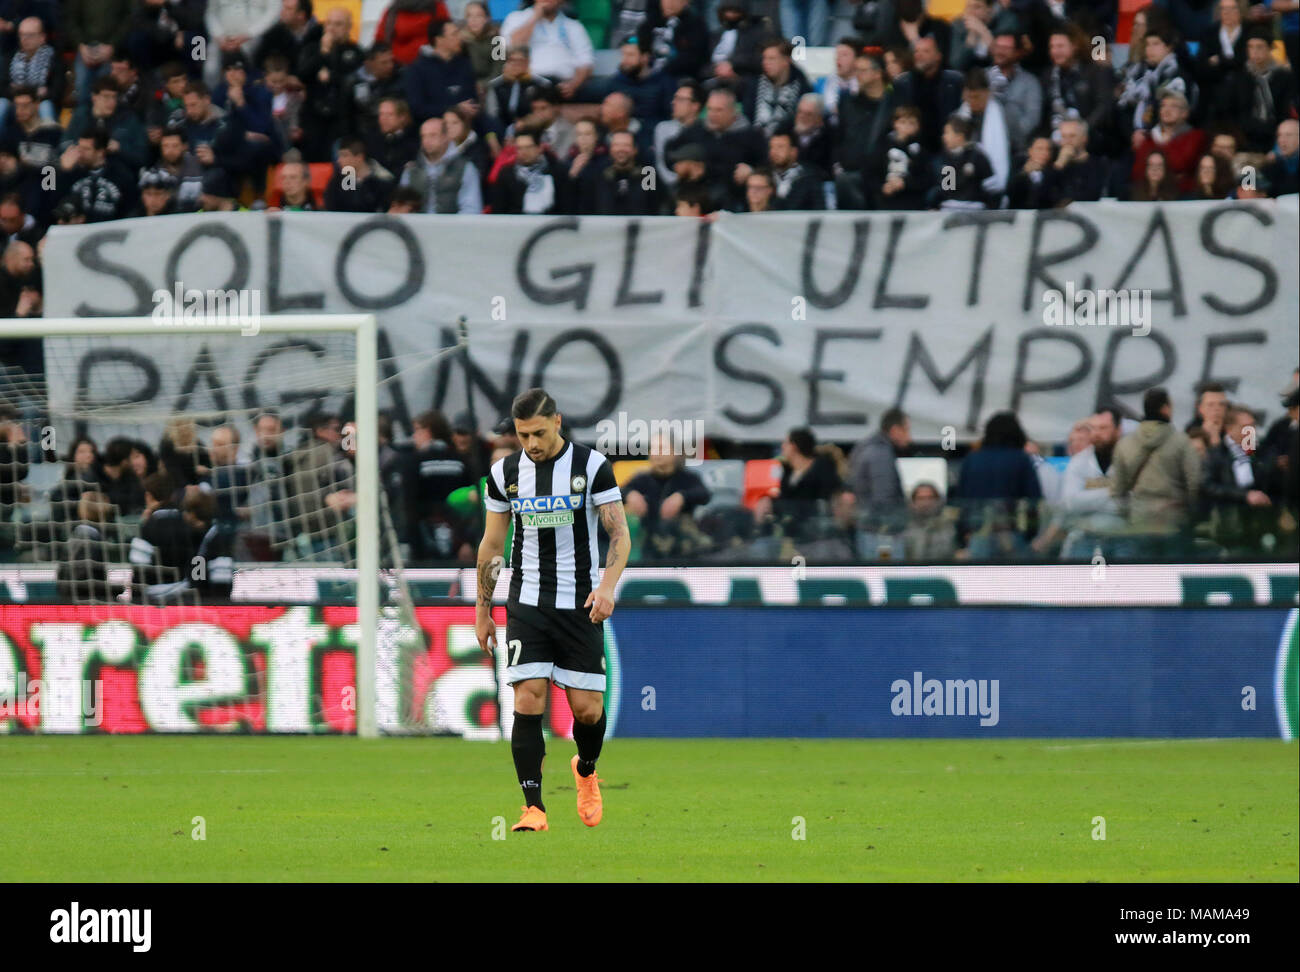 Udine, Italy. 3rd April, 2018. ITALY, Udine: Udinese's forward Giuseppe Pezzella behind him Udines's supporters shows a banner of protest during the Serie A football match between Udinese Calcio v AC Fiorentina at Dacia Arena Stadium on 3rd April, 2018. Credit: Andrea Spinelli/Alamy Live News Stock Photo